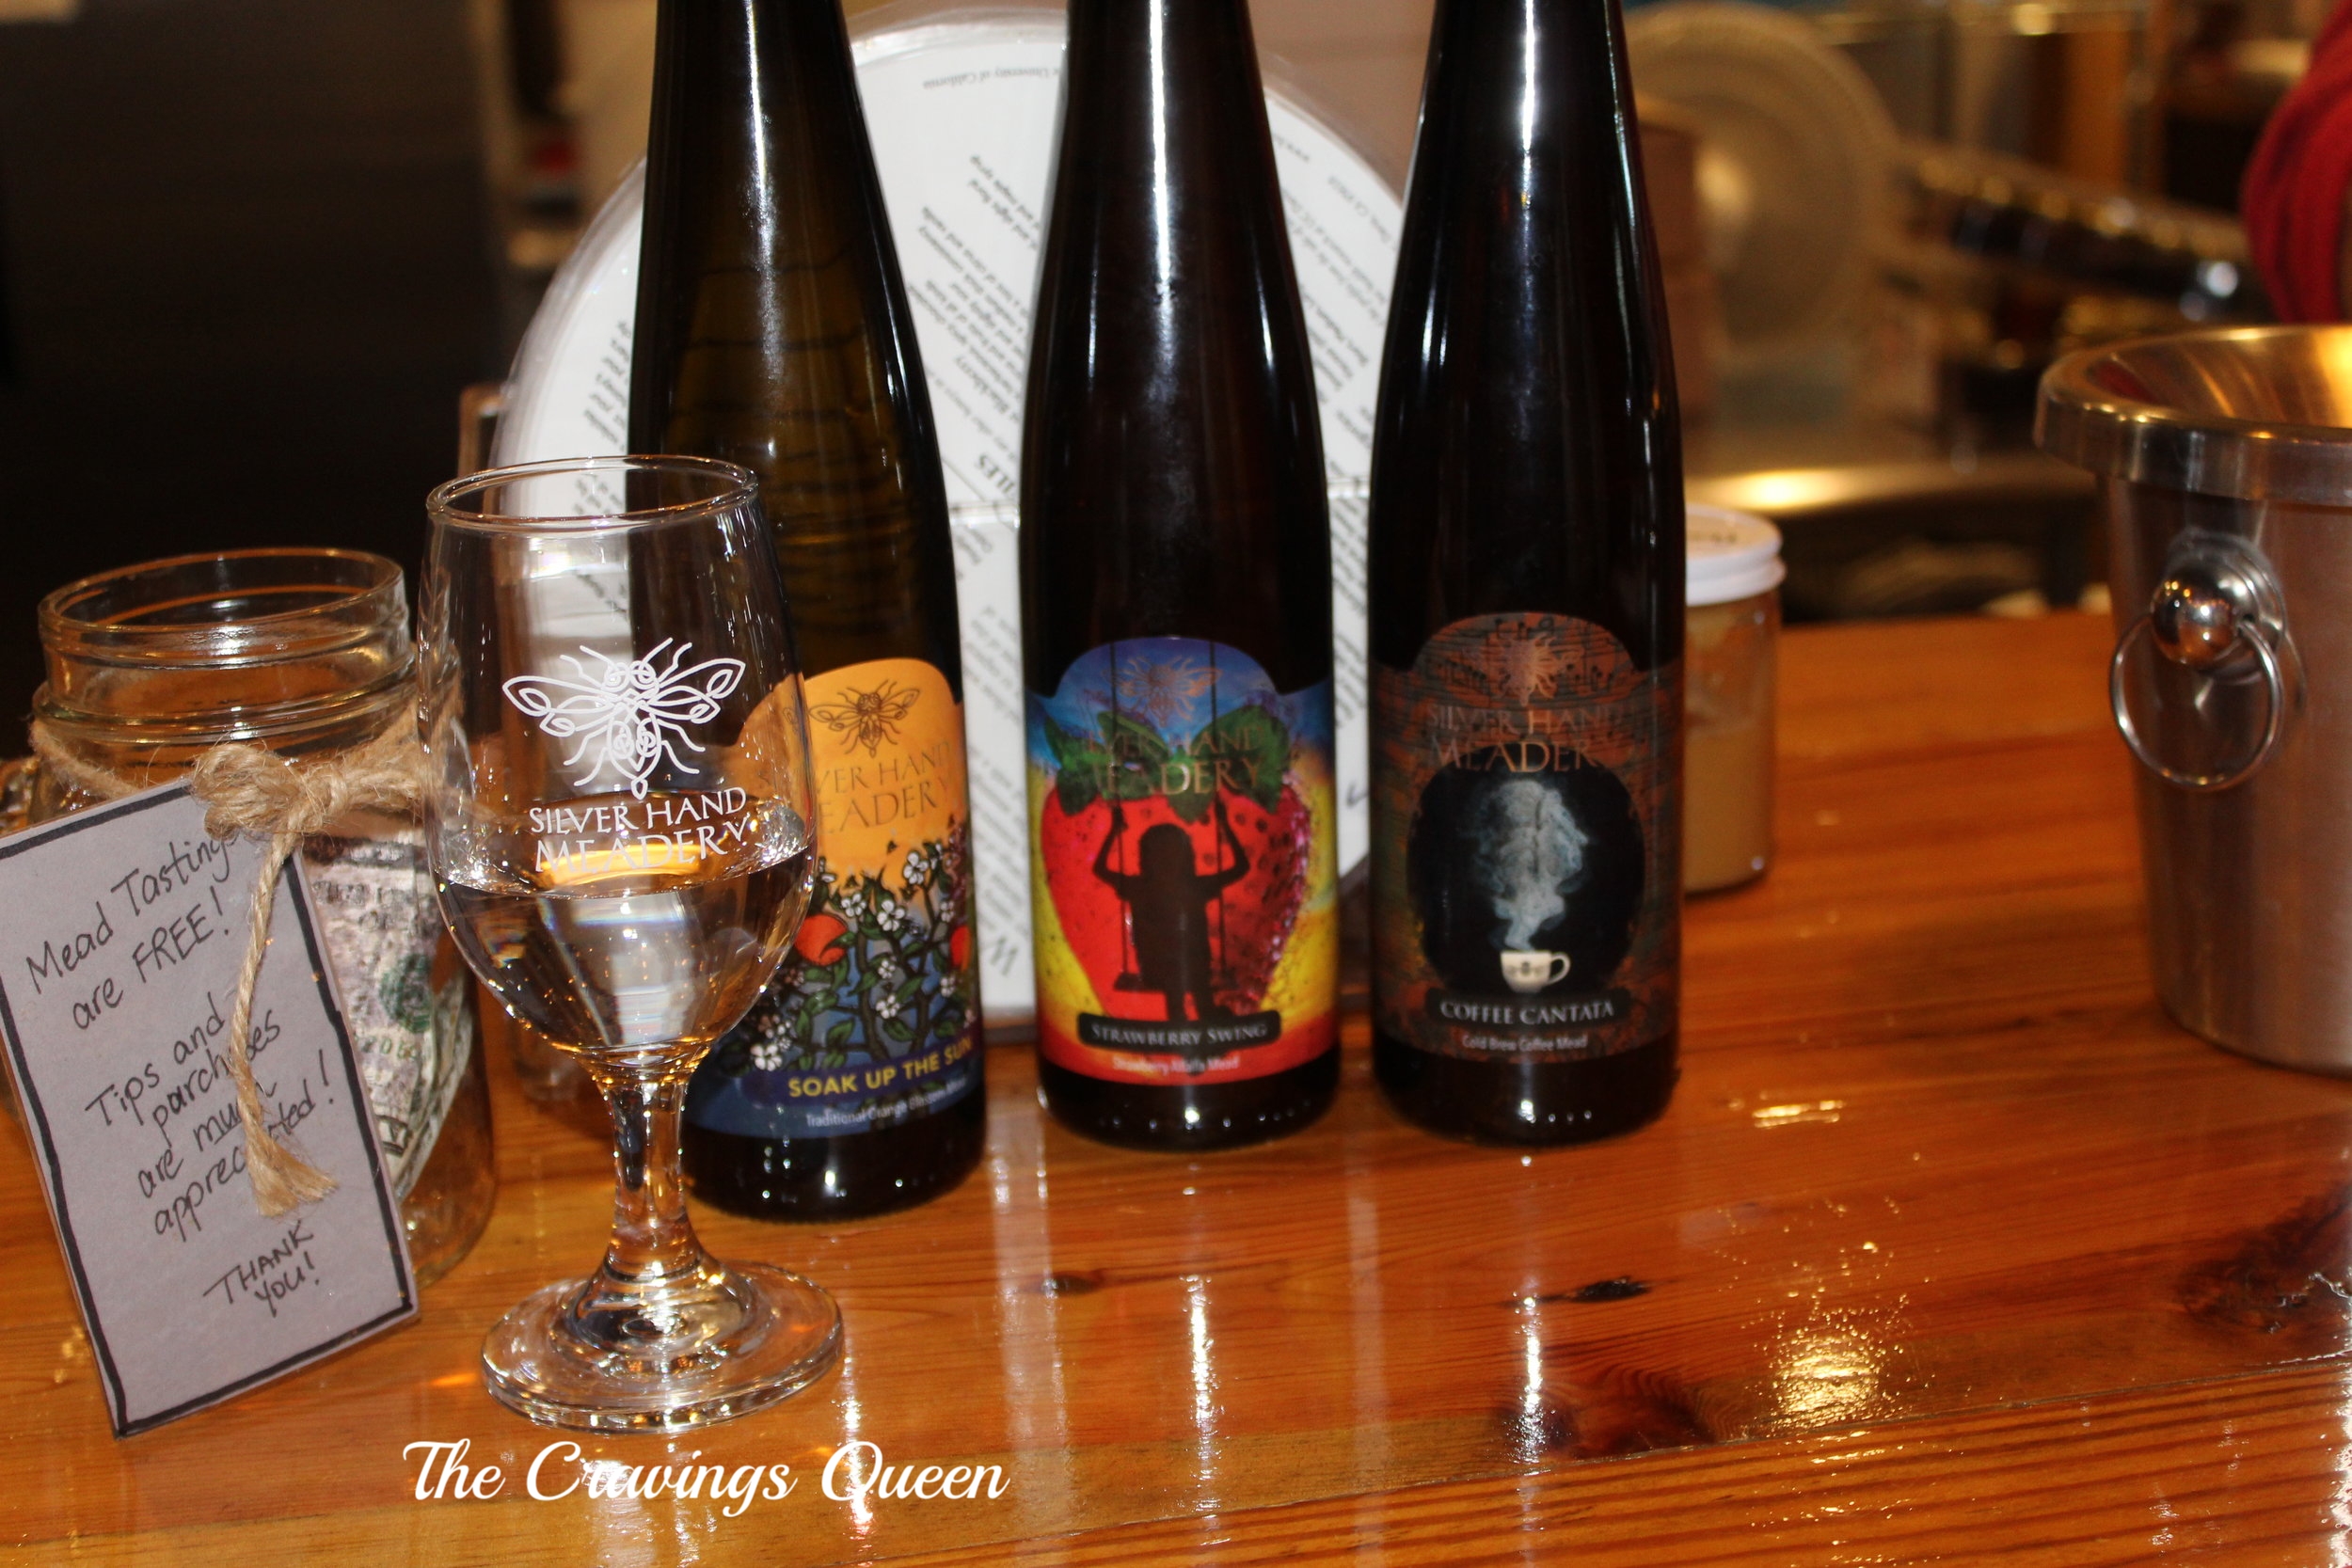 Silver-Hand-Meadery-meads.JPG